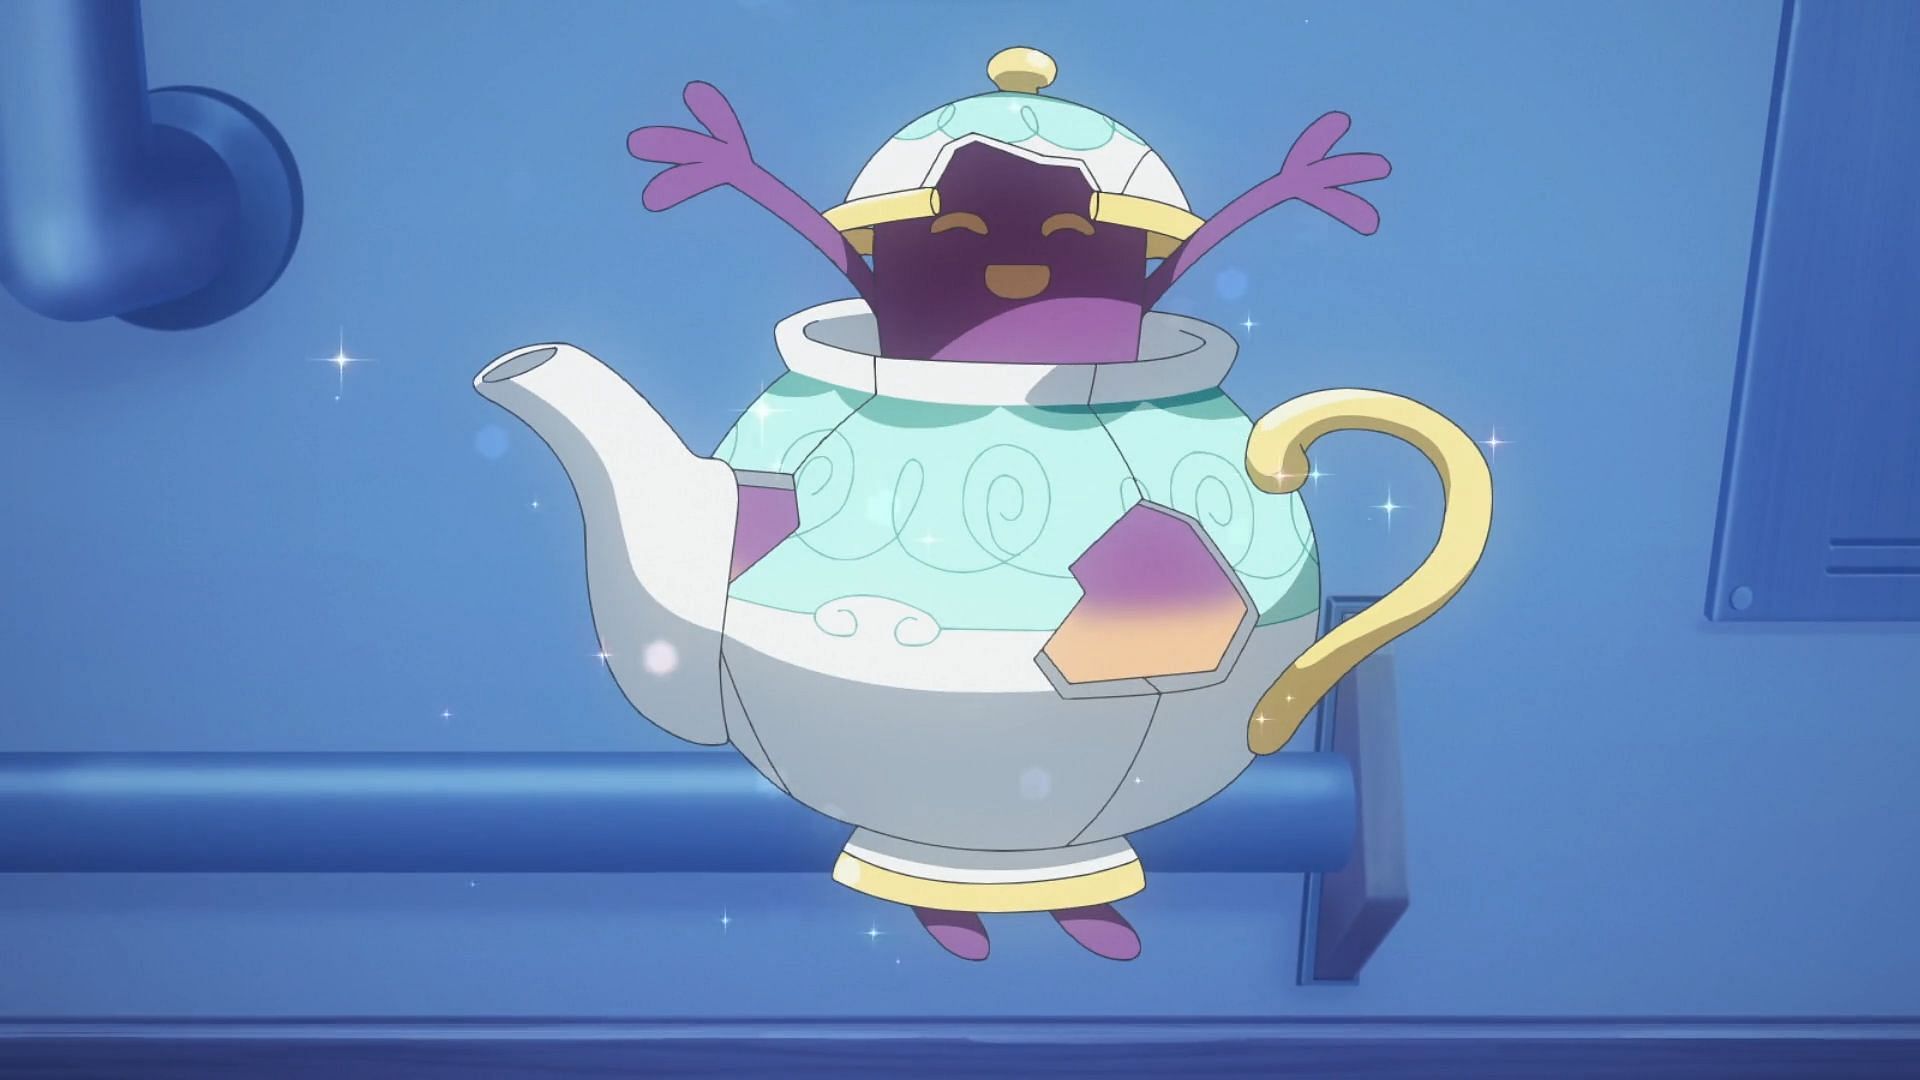 Polteageist&#039;s original design was inspired by old English tea pots (Image via The Pokemon Company)